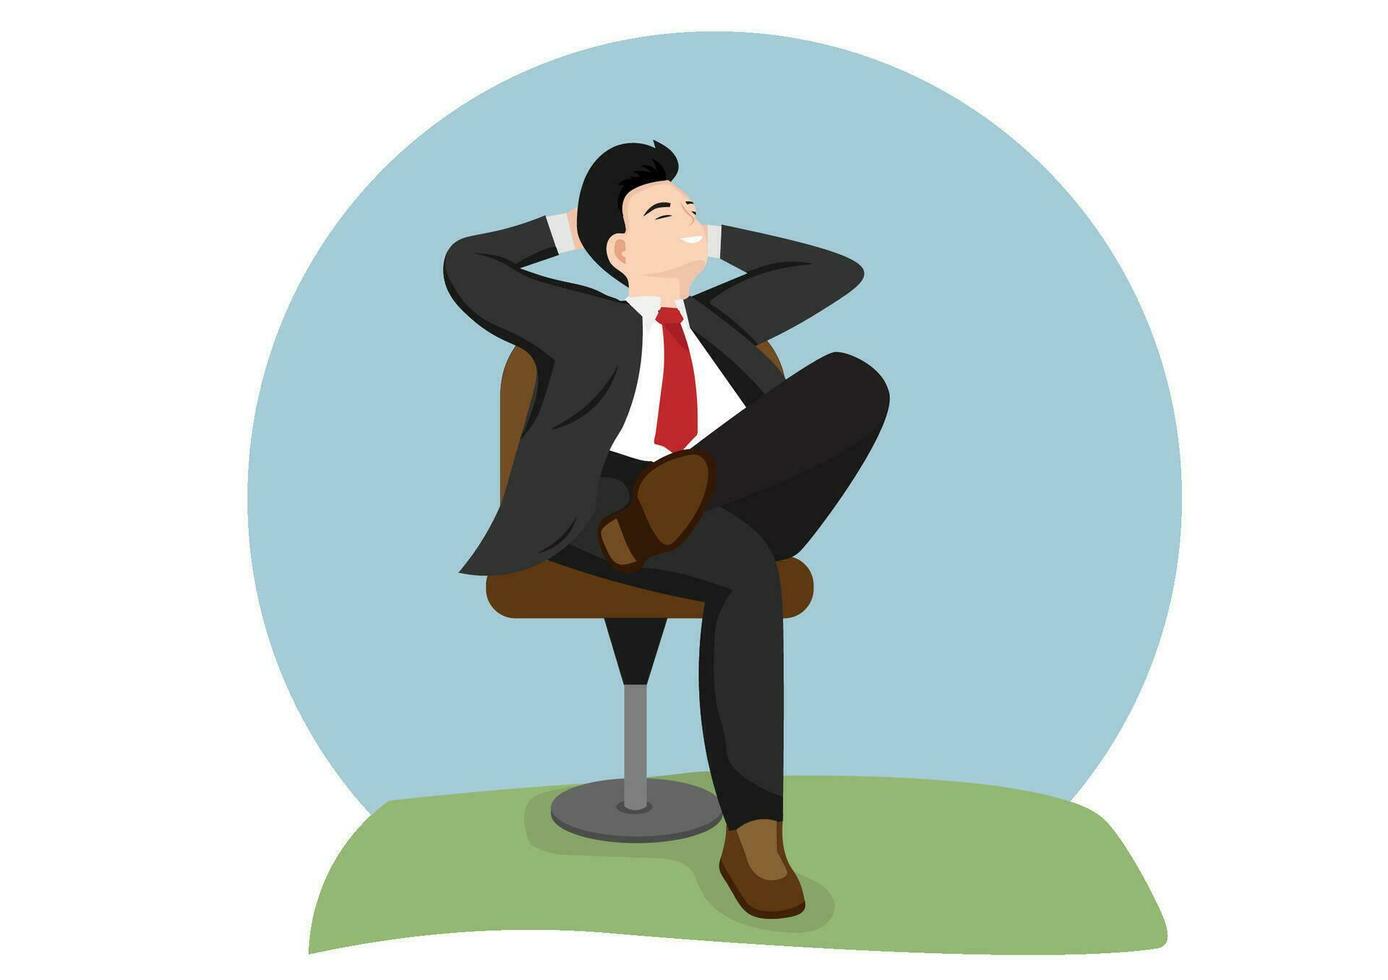 Businessman sitting calmly on a chair Cross your legs and place your hands behind your head. Business leader resting in a calm pose. Illustrations vector